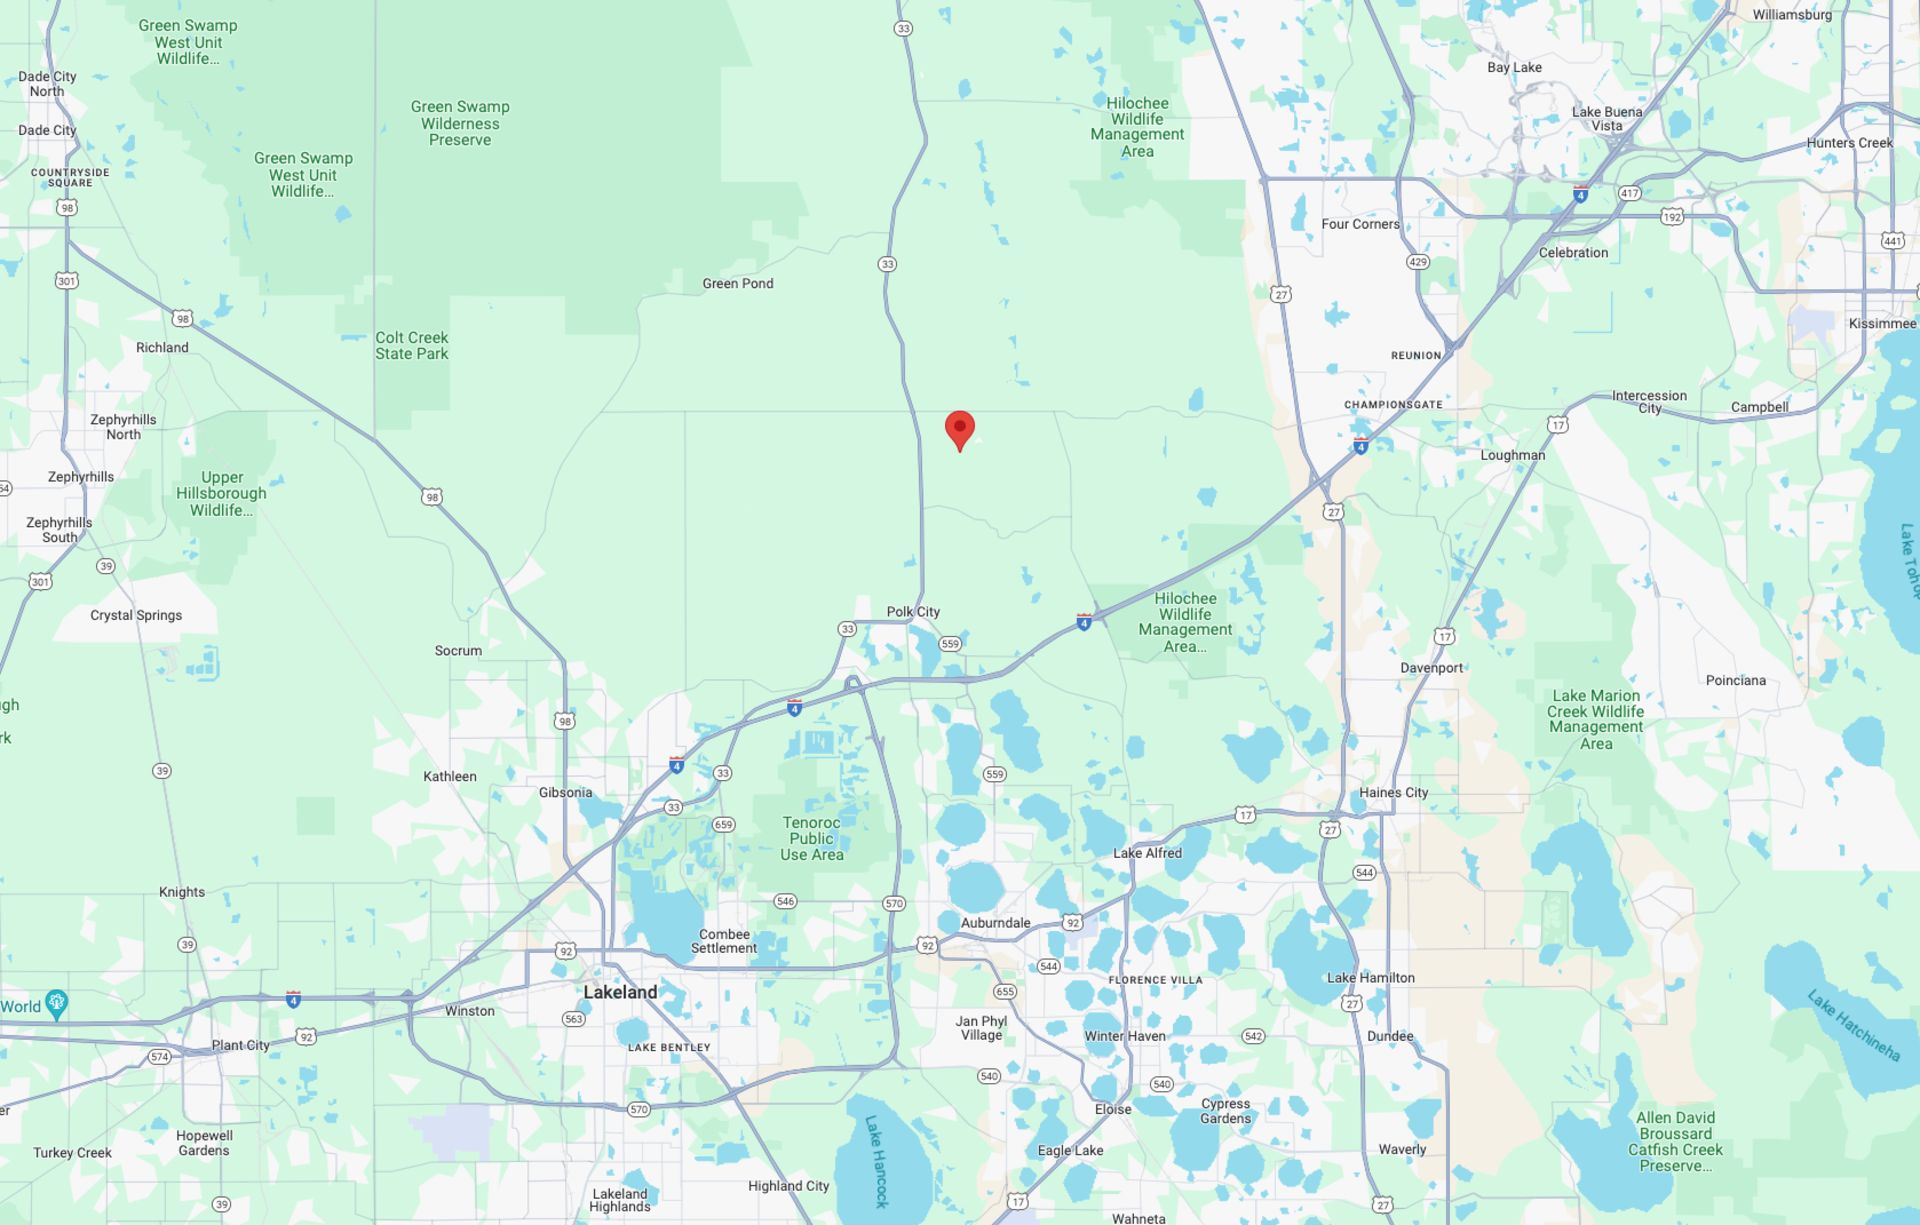 Invest in Polk County, Florida! - Image 9 of 9